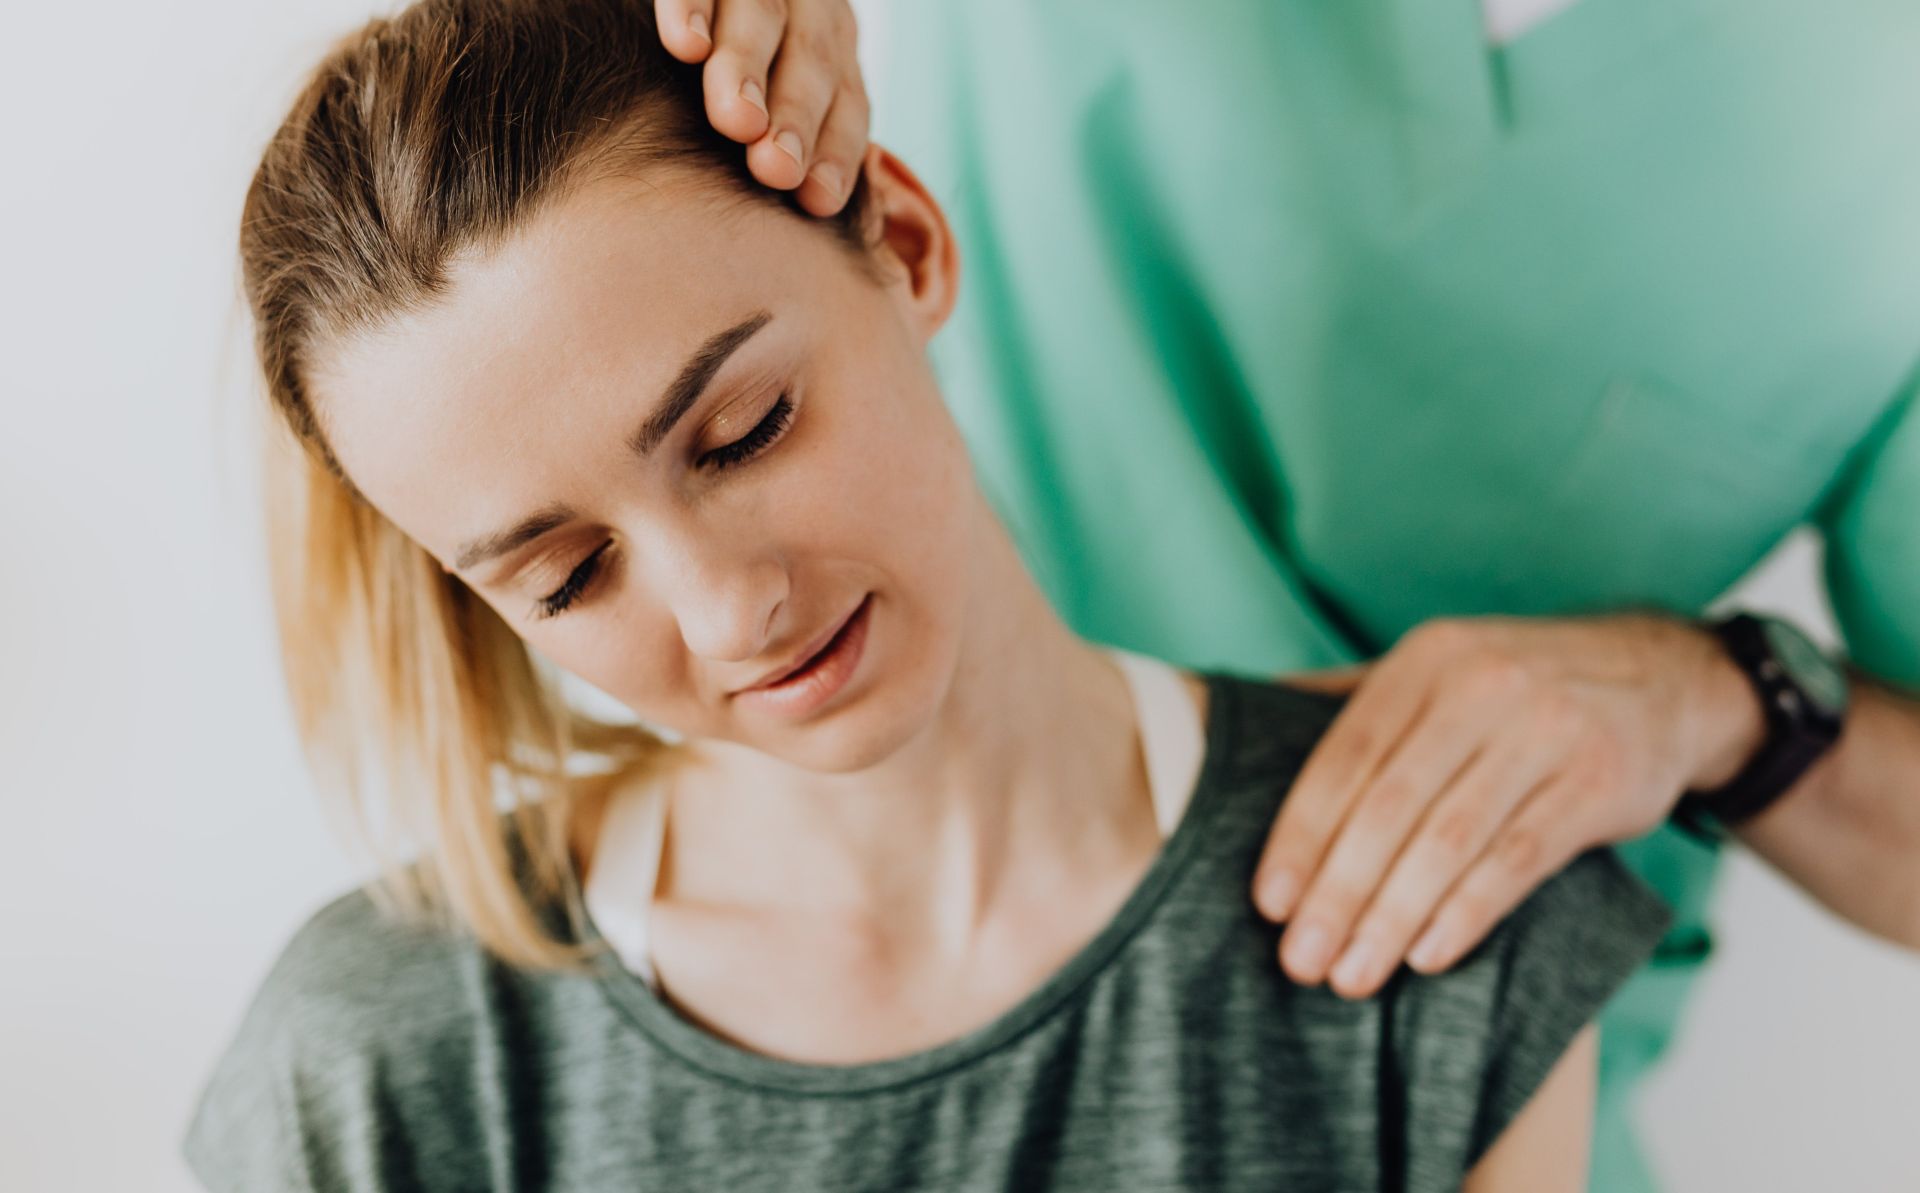 Crop professional male massage therapist in green medical uniform doing therapeutic neck massage on content female patient wearing casual clothes